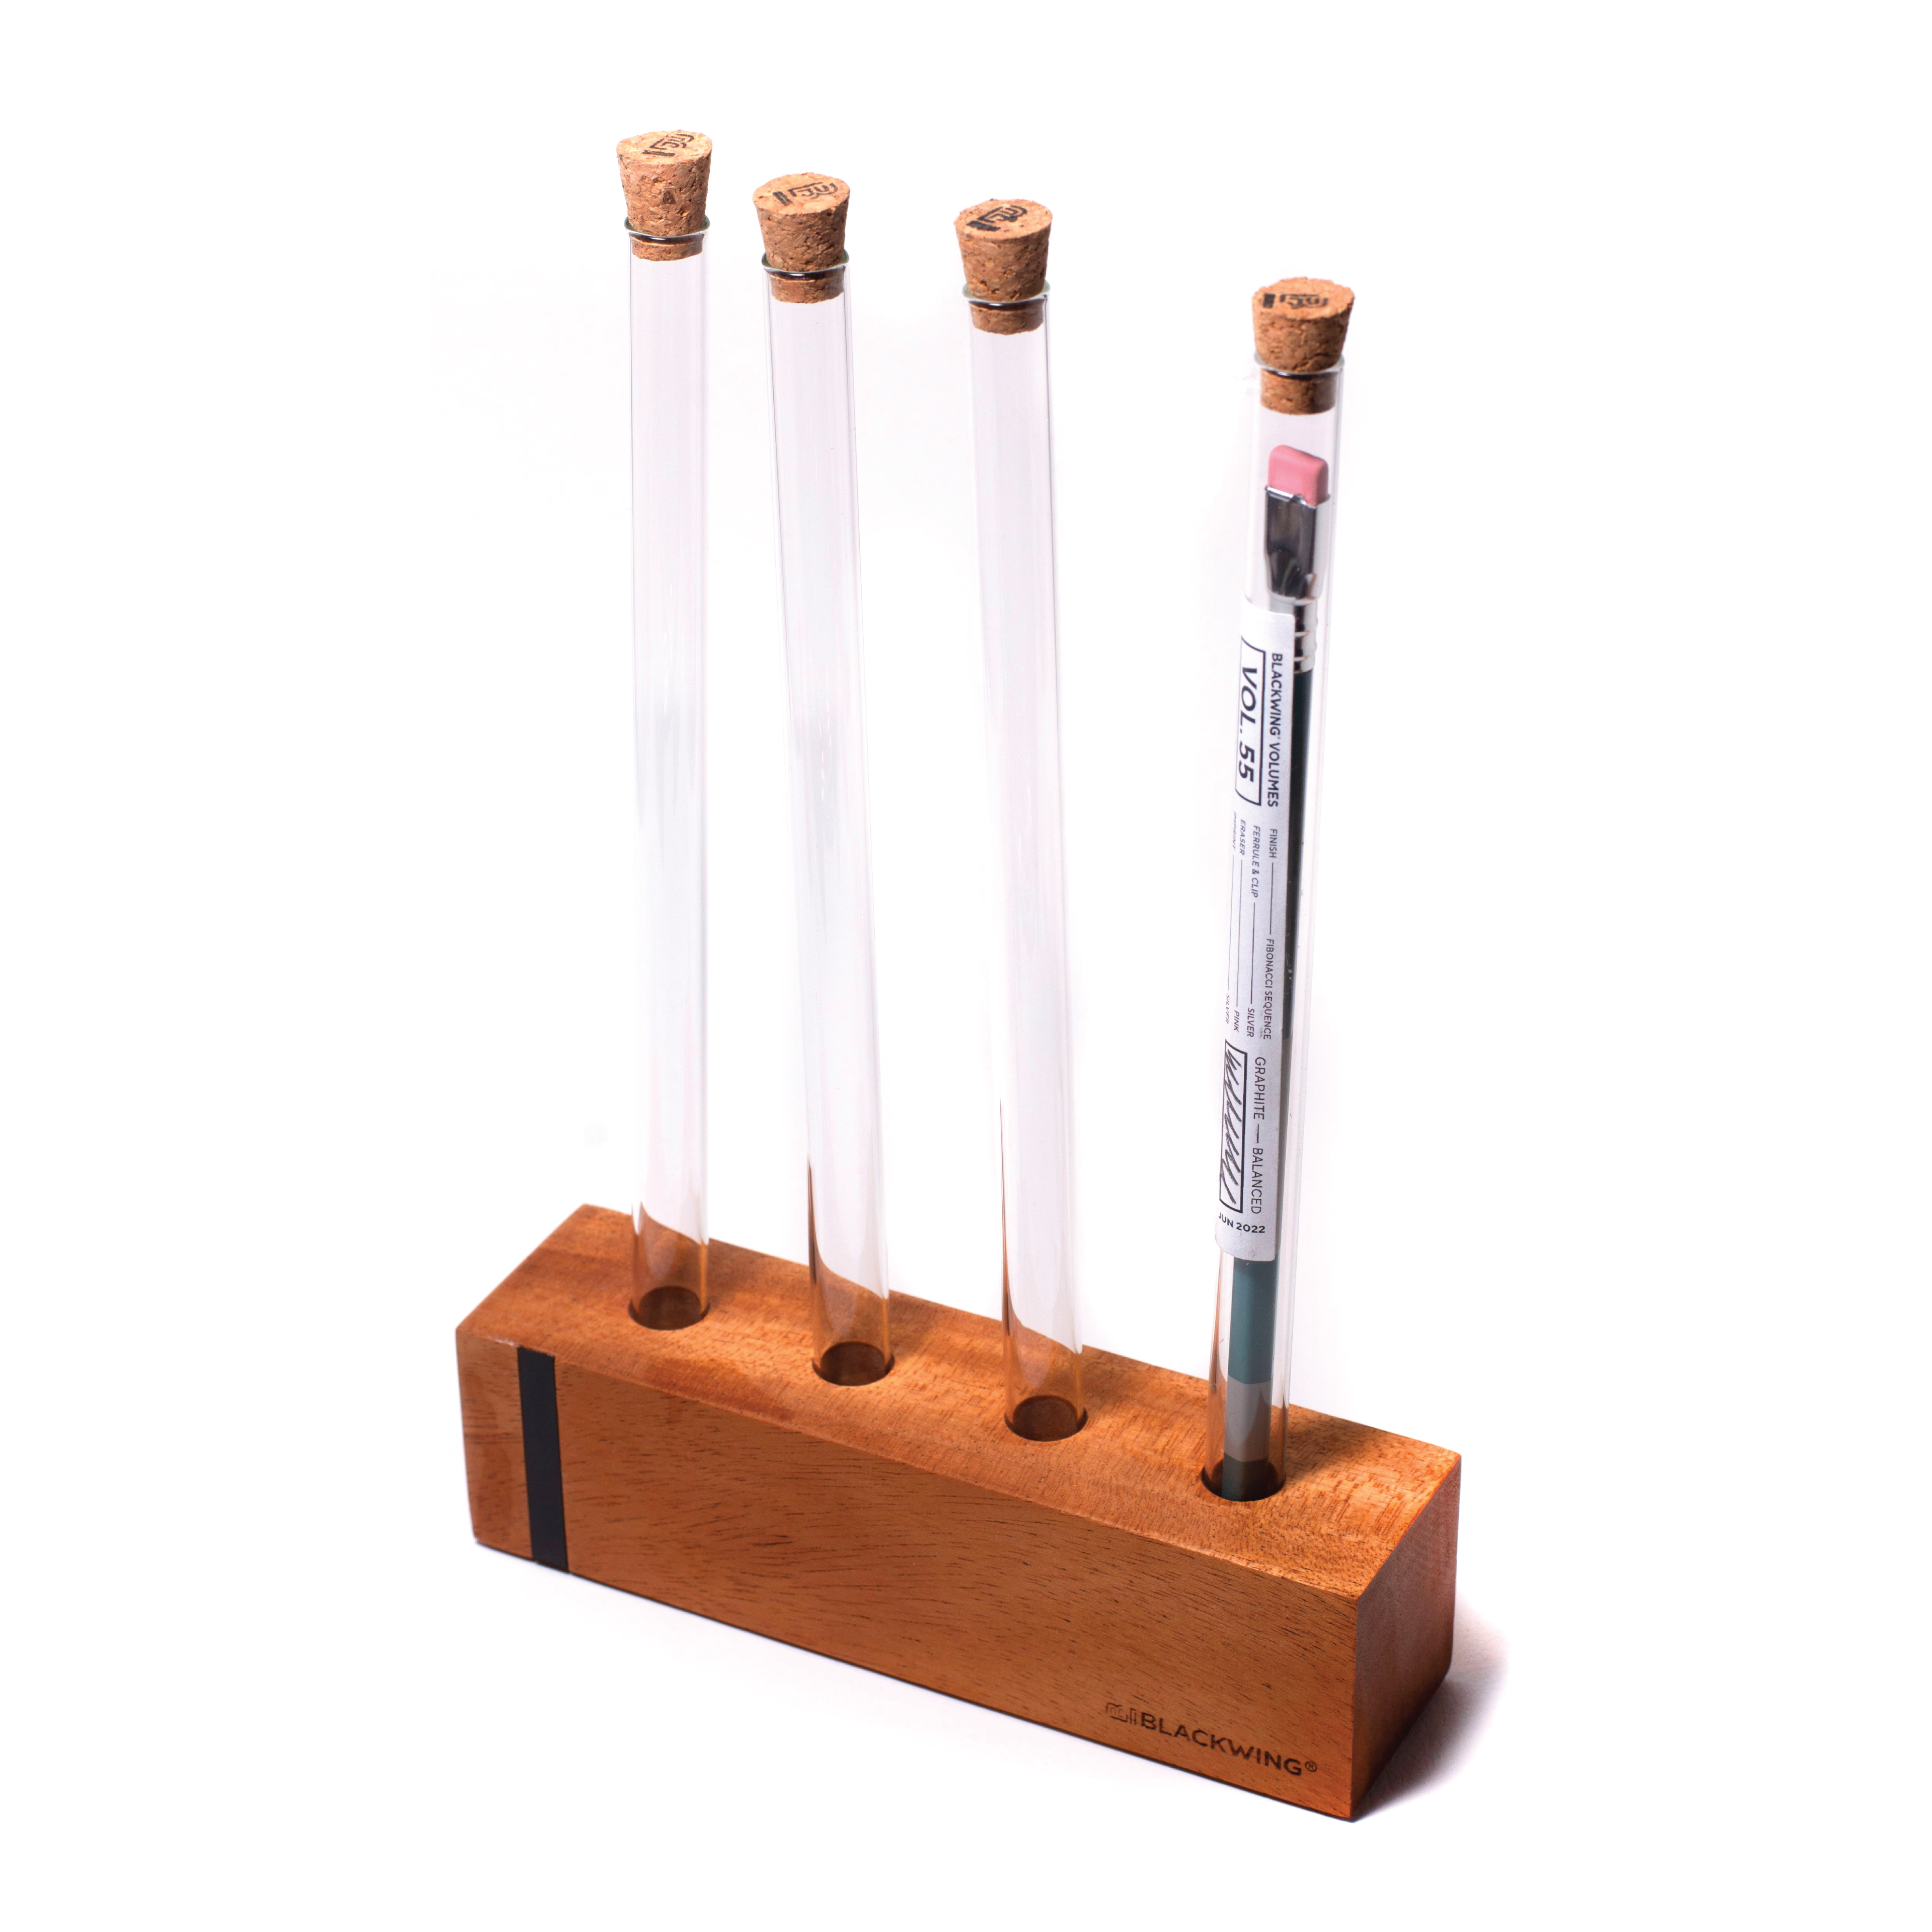 A wooden pencil holder displaying three Blackwing Upright Four Tube Display pencils.